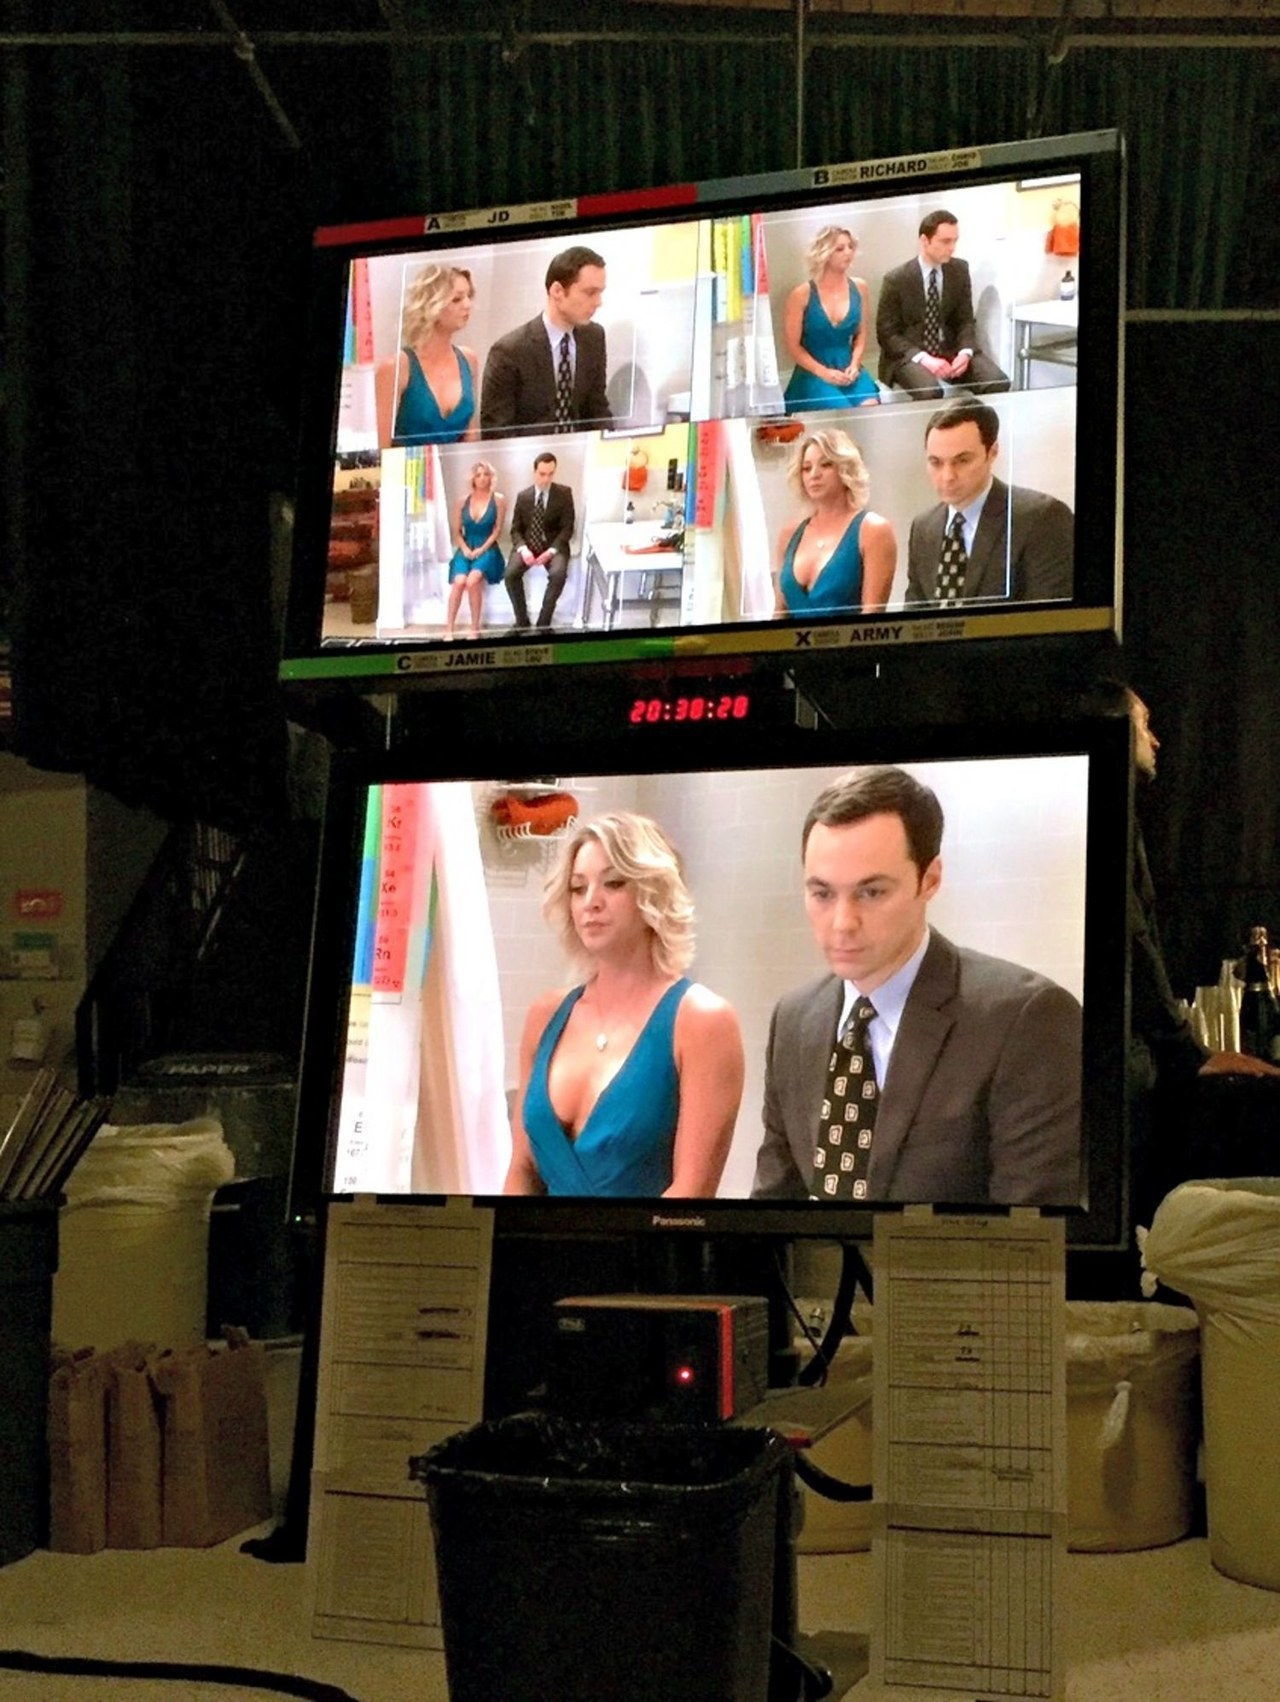 groß bang theory behind the scenes